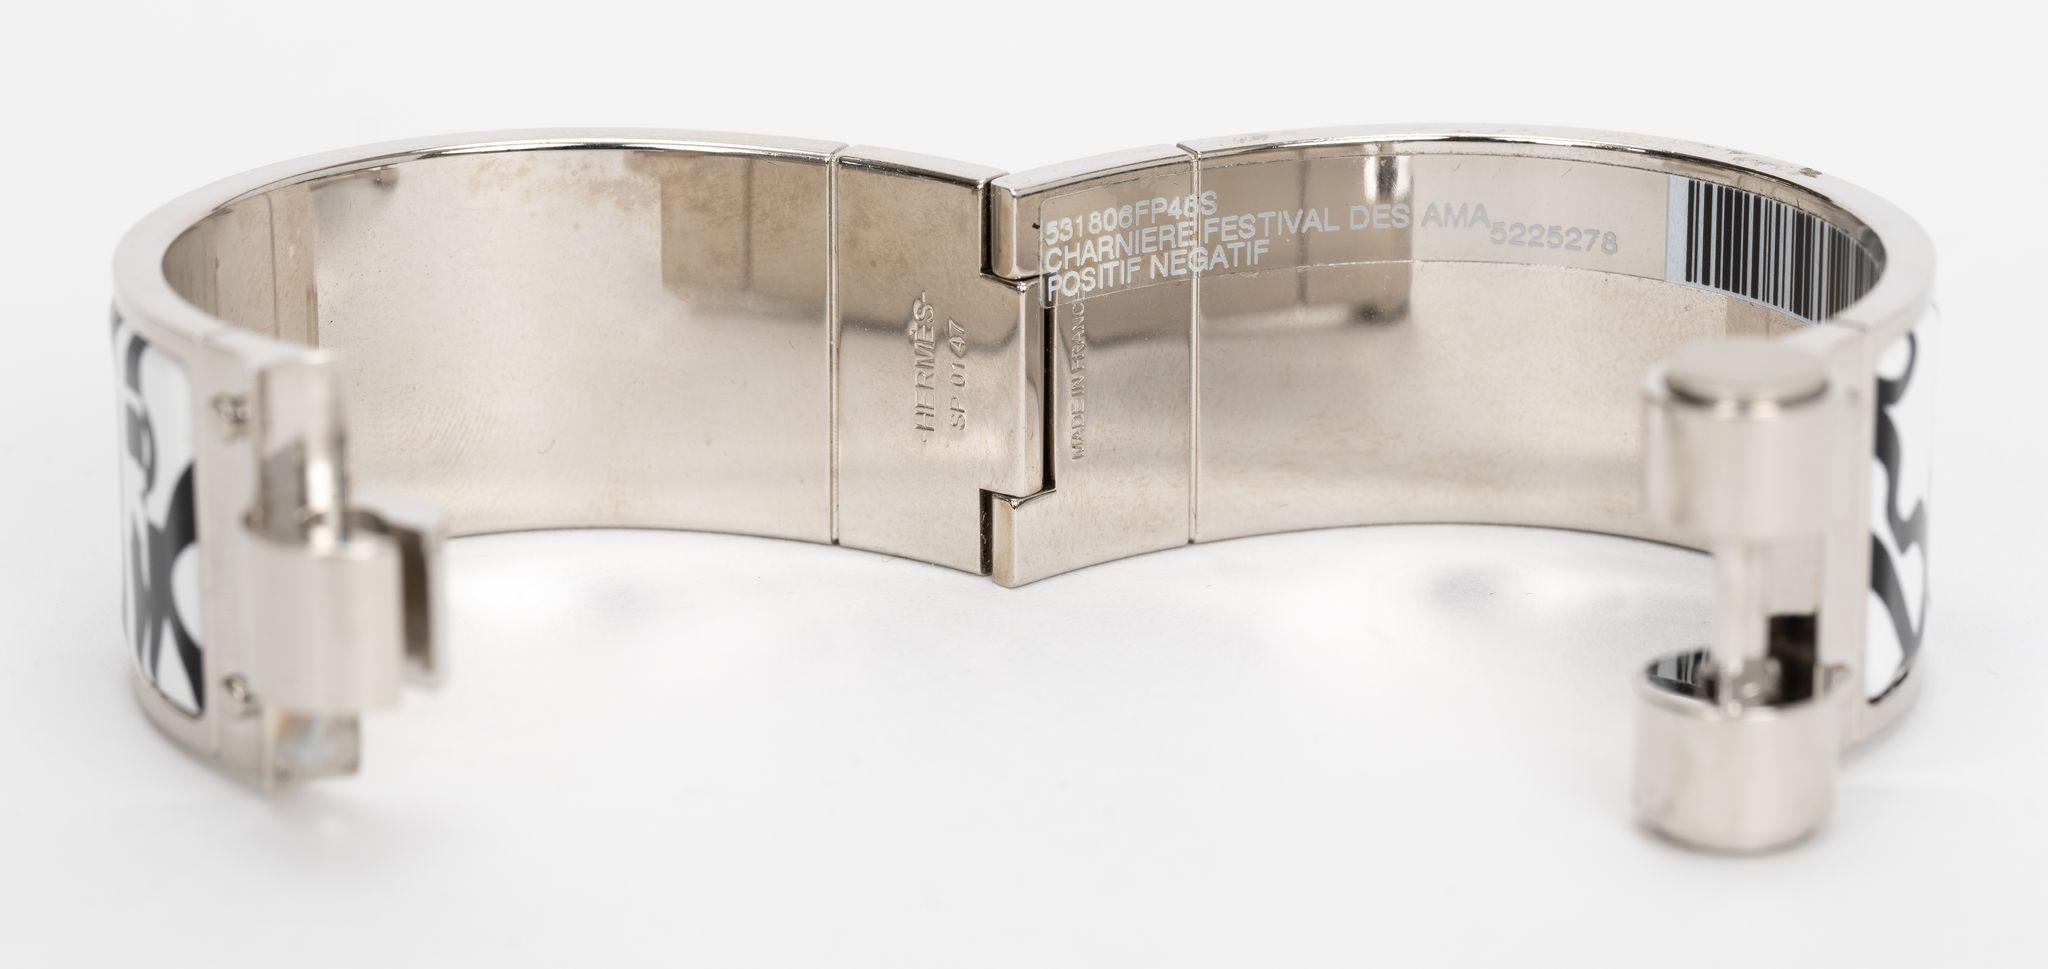 The Hermes Charniere Hinged Bracelet features an printed enamel and silver palladium body. Positif/negatif print. The beautiful silhouette is complete with a push-clasp. Brand new in unused condition, original sticker still attached. Size small,